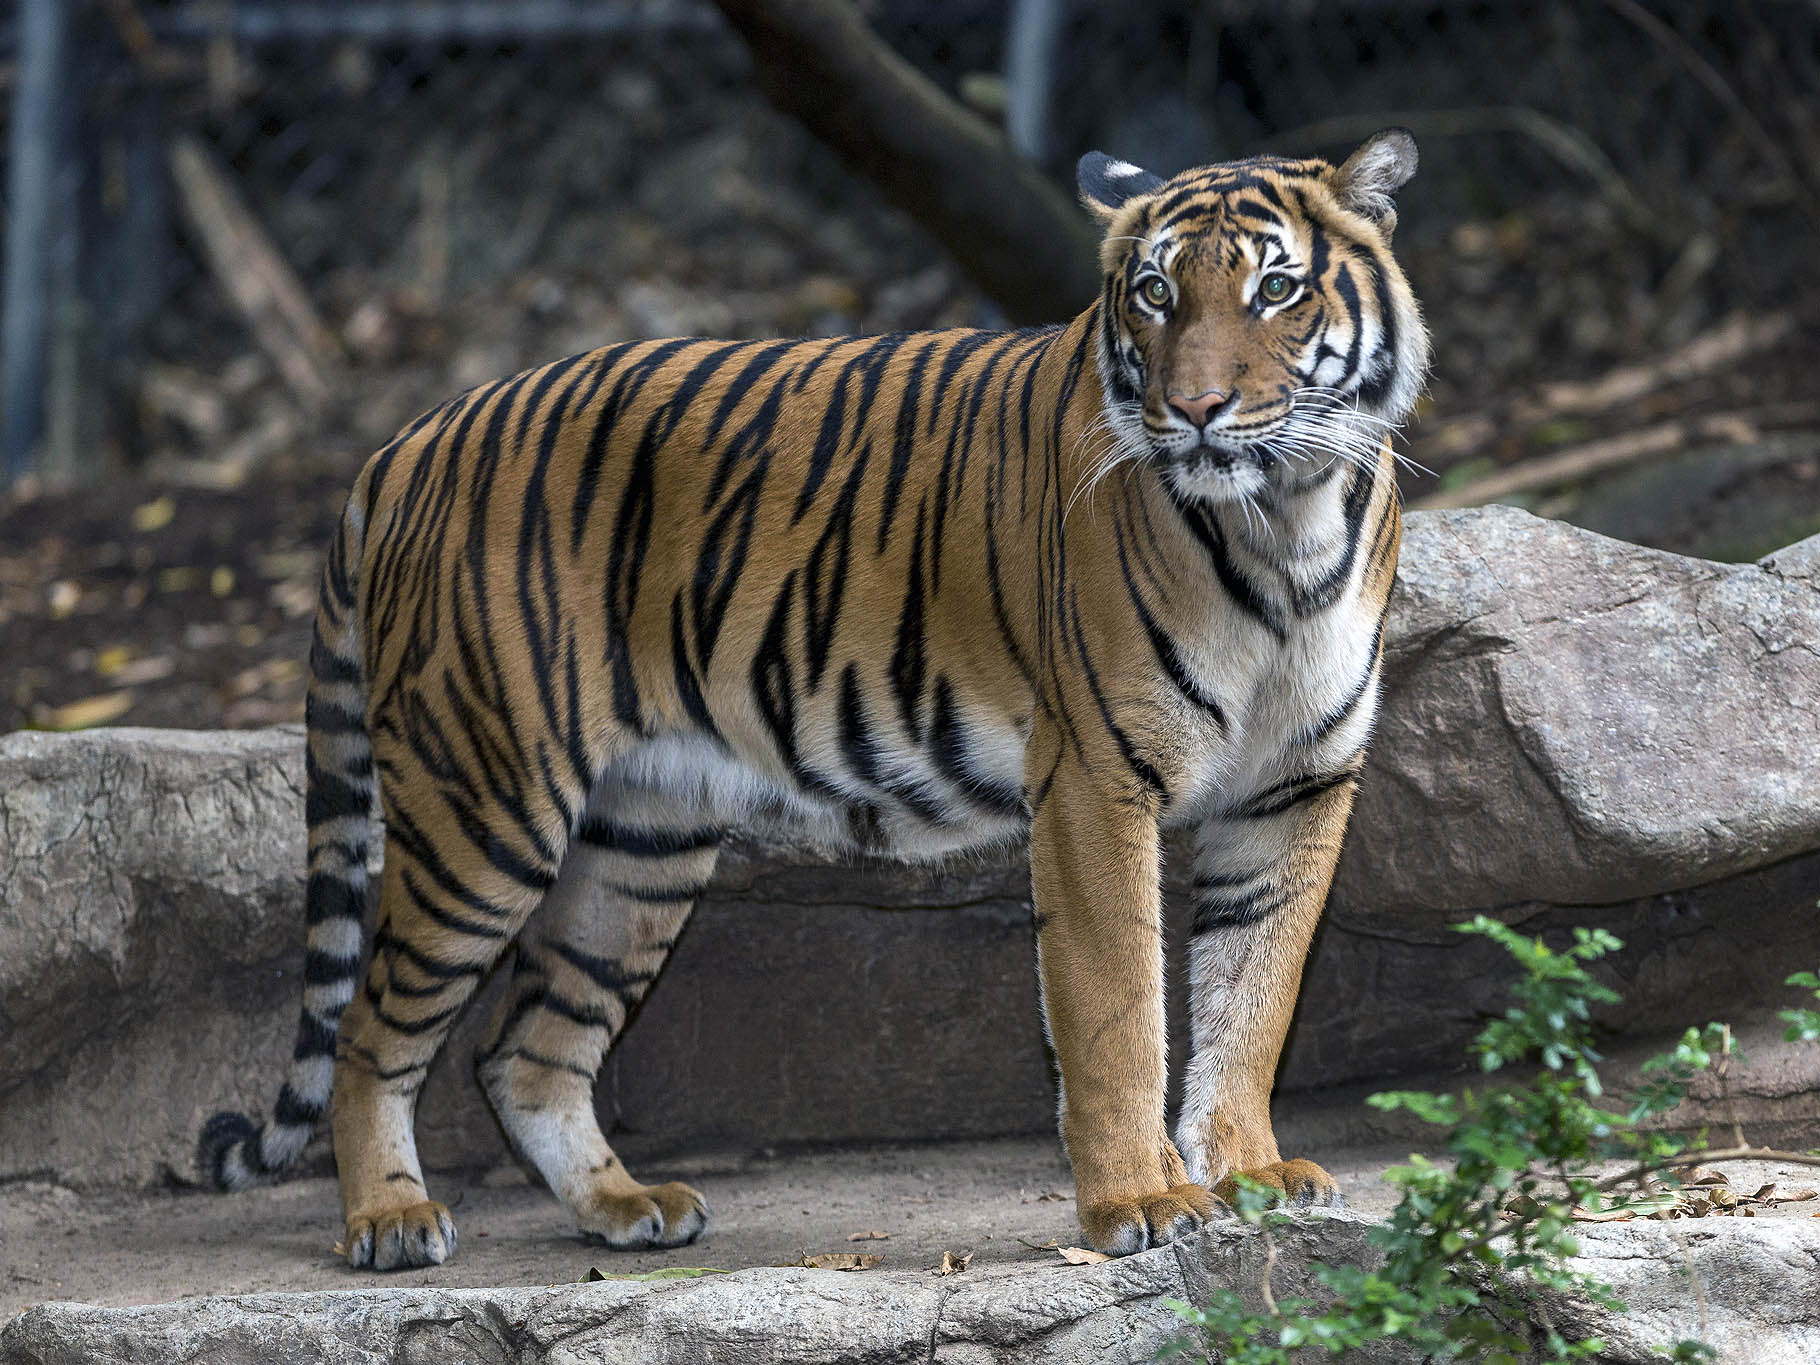 Tiger fatally mauls intended mate at San Diego Zoo - CBS News